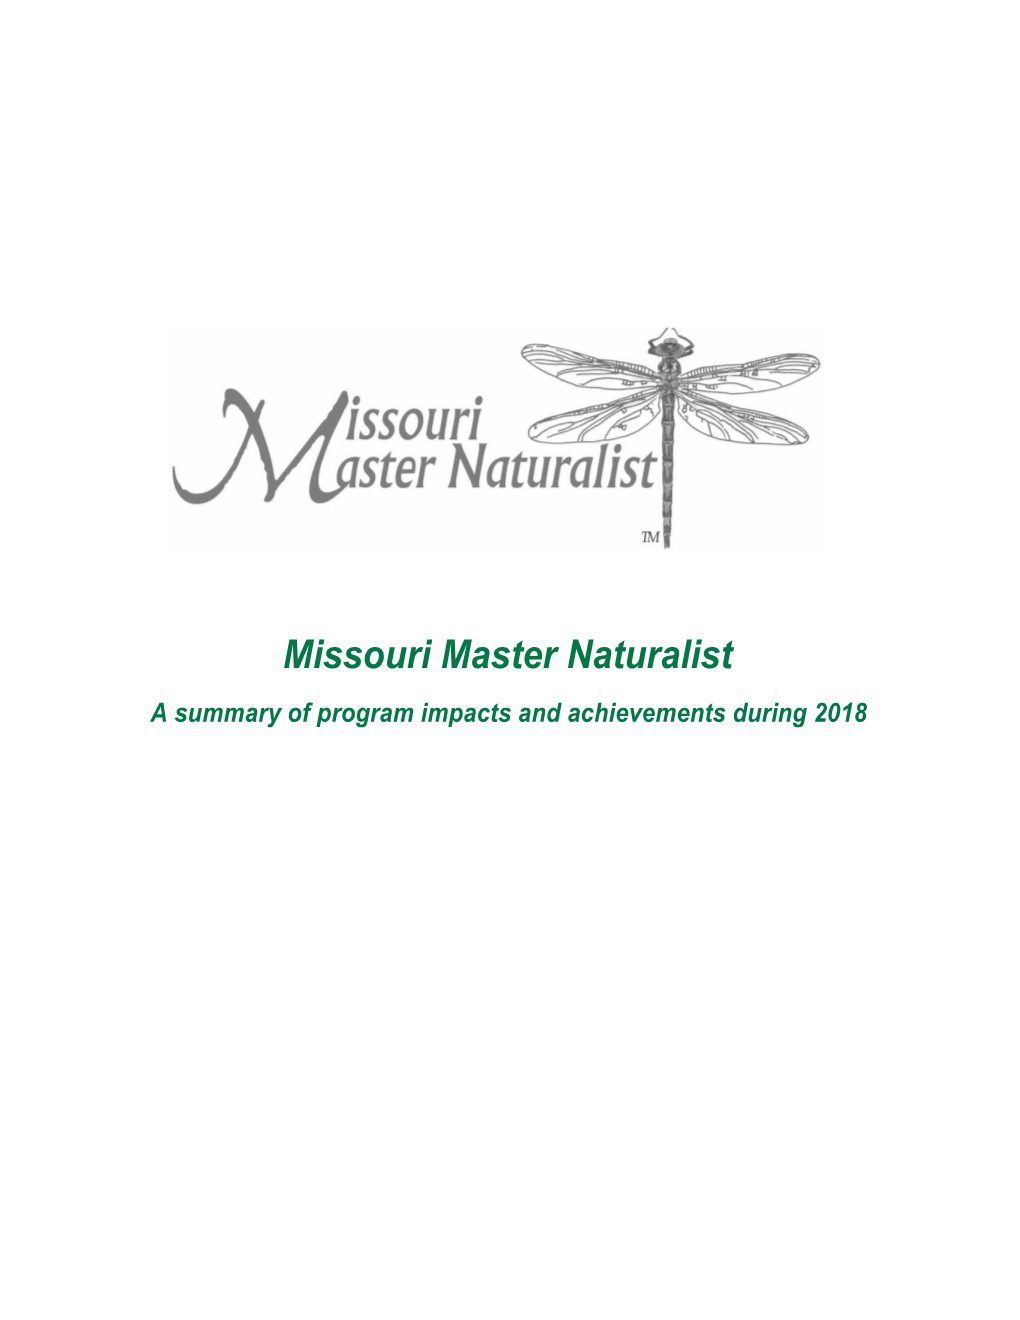 Missouri Master Naturalist a Summary of Program Impacts and Achievements During 2018